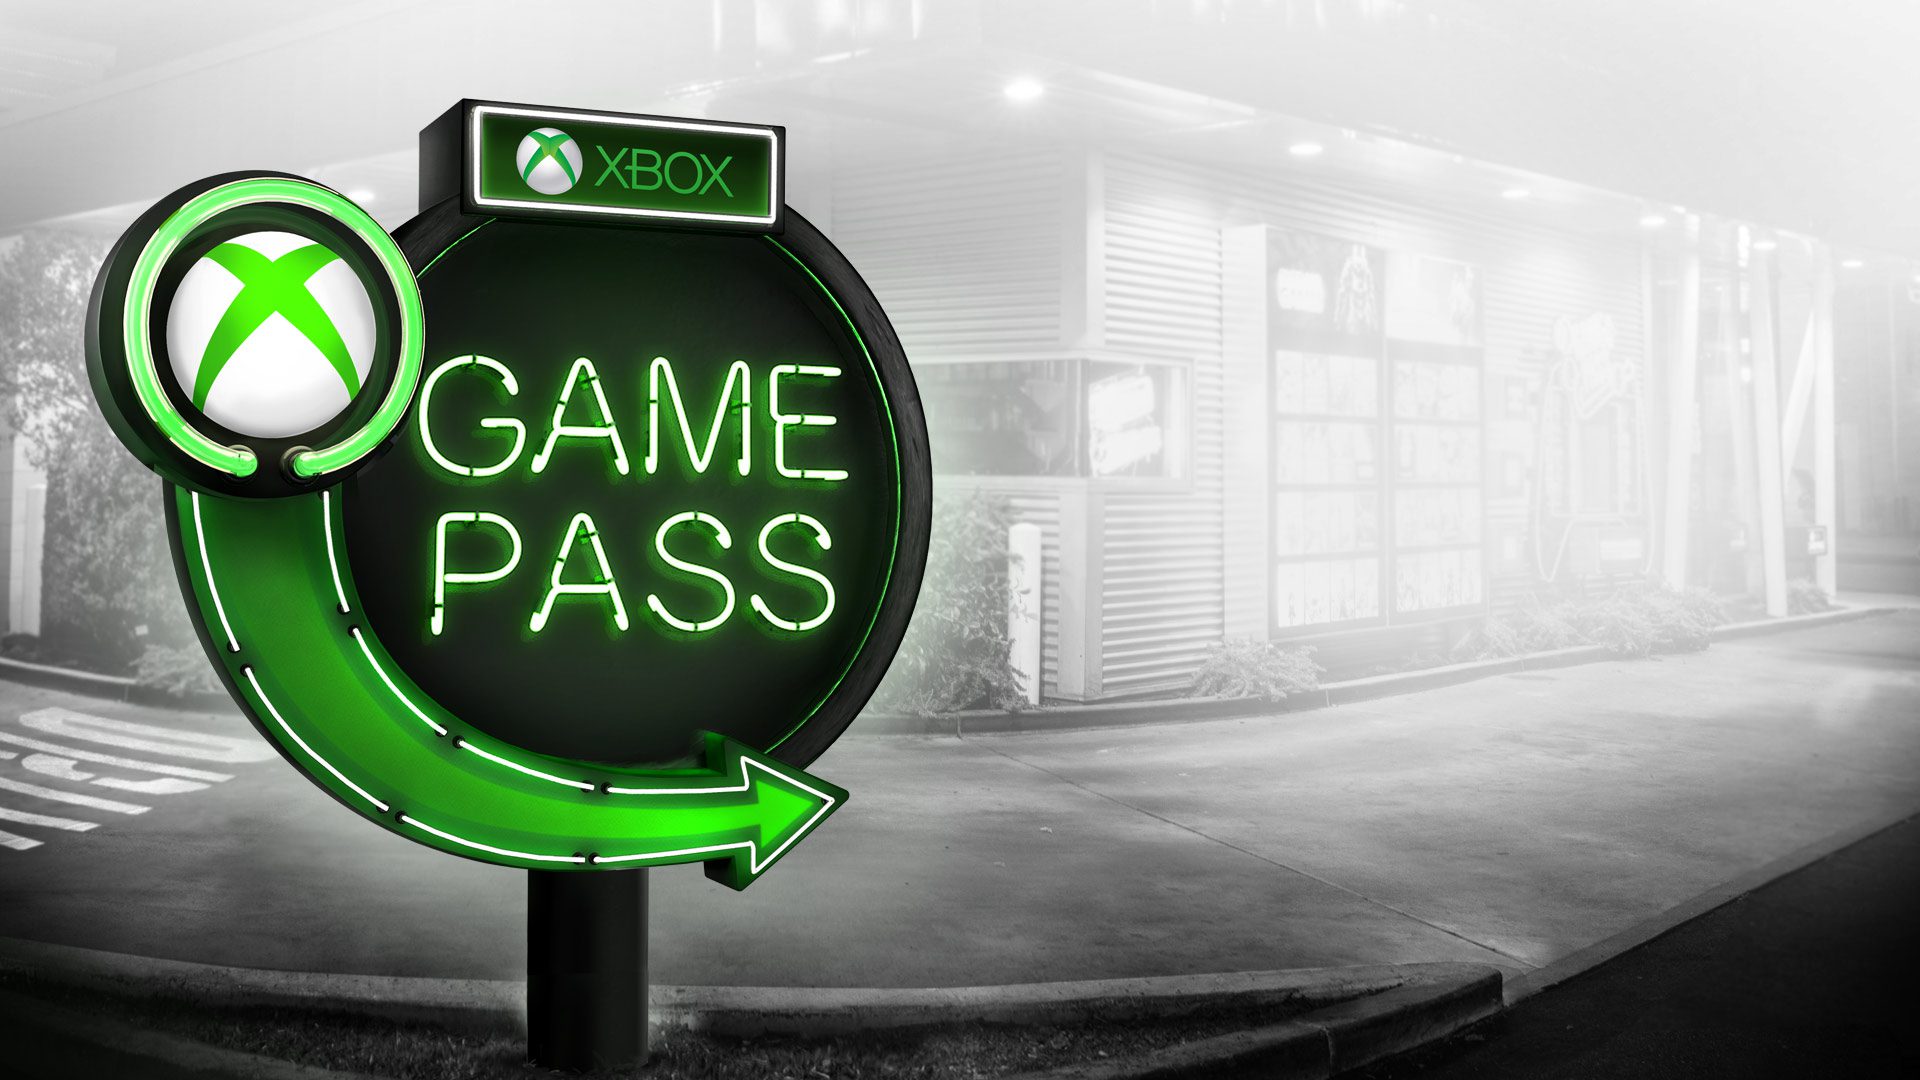 error installing games to pc using the xbox game pass